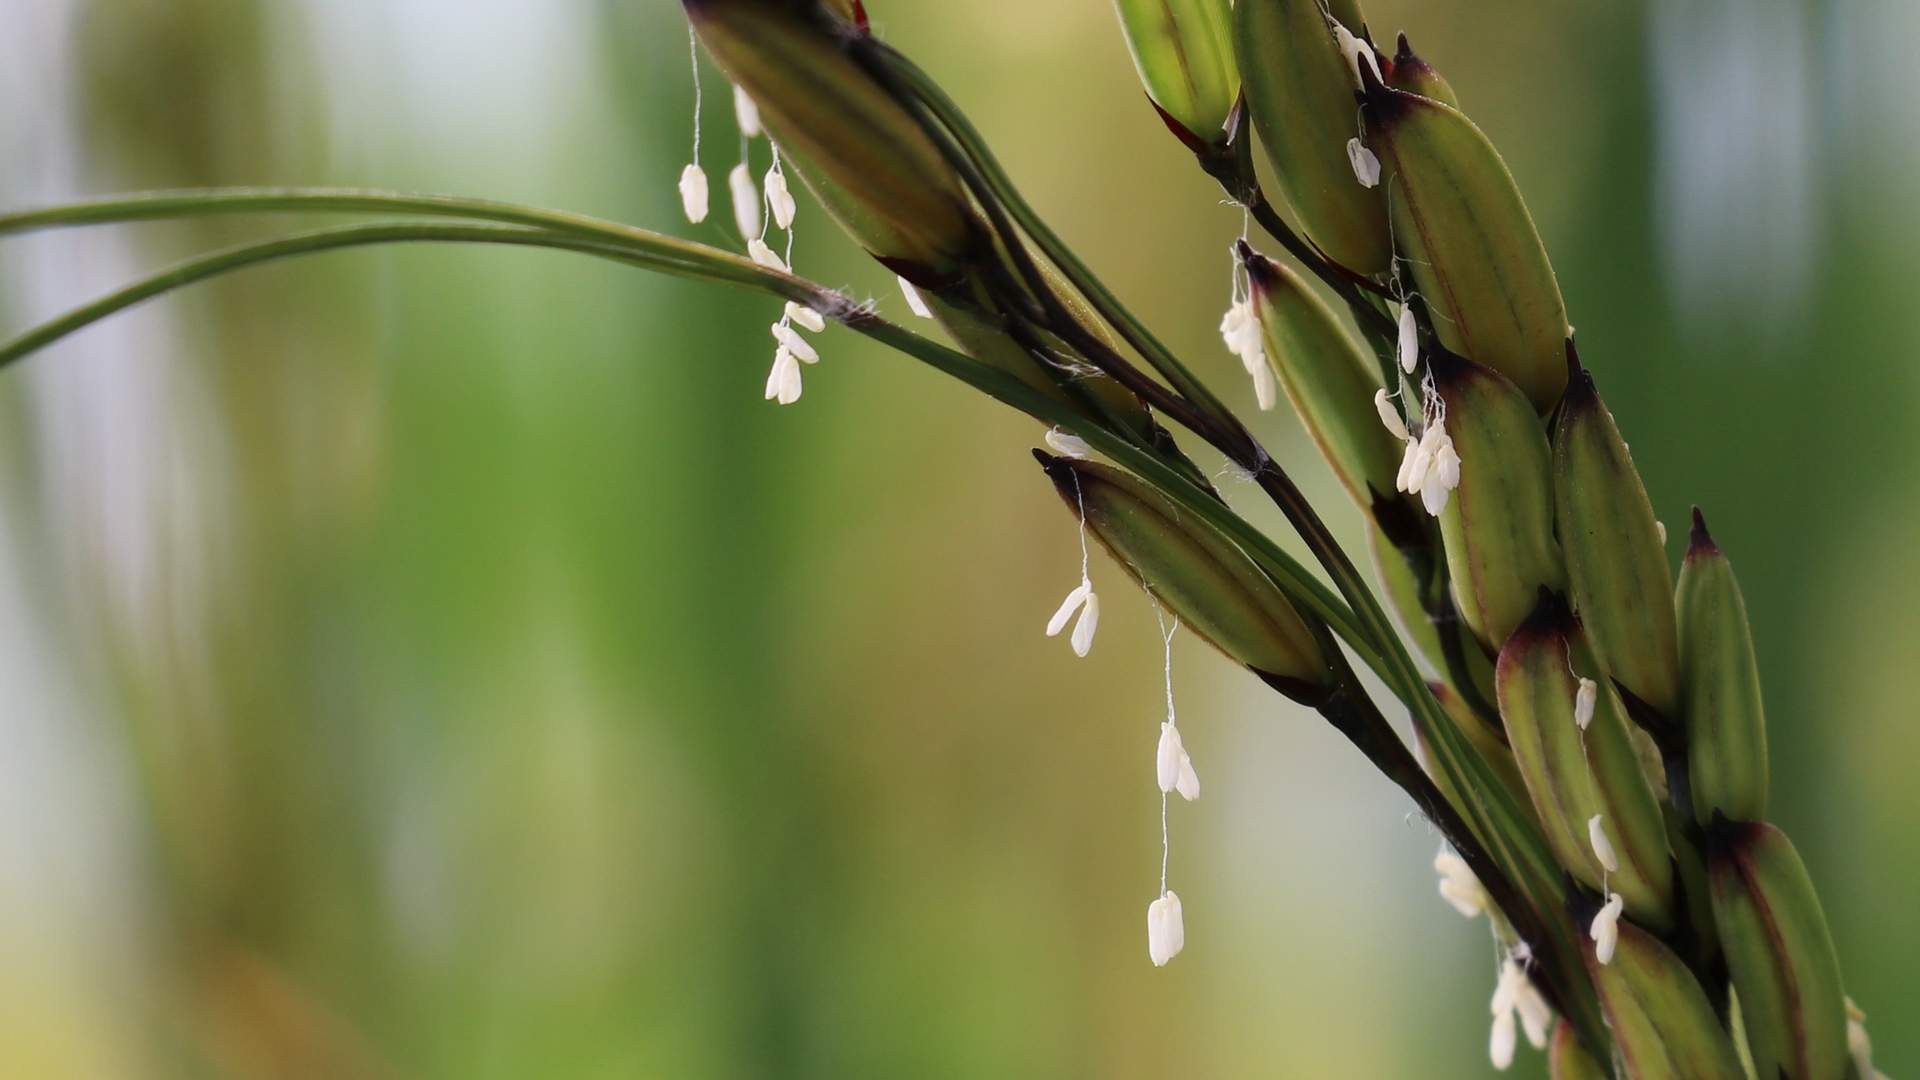 Did you know that rice can have beautiful and diverse flowers?